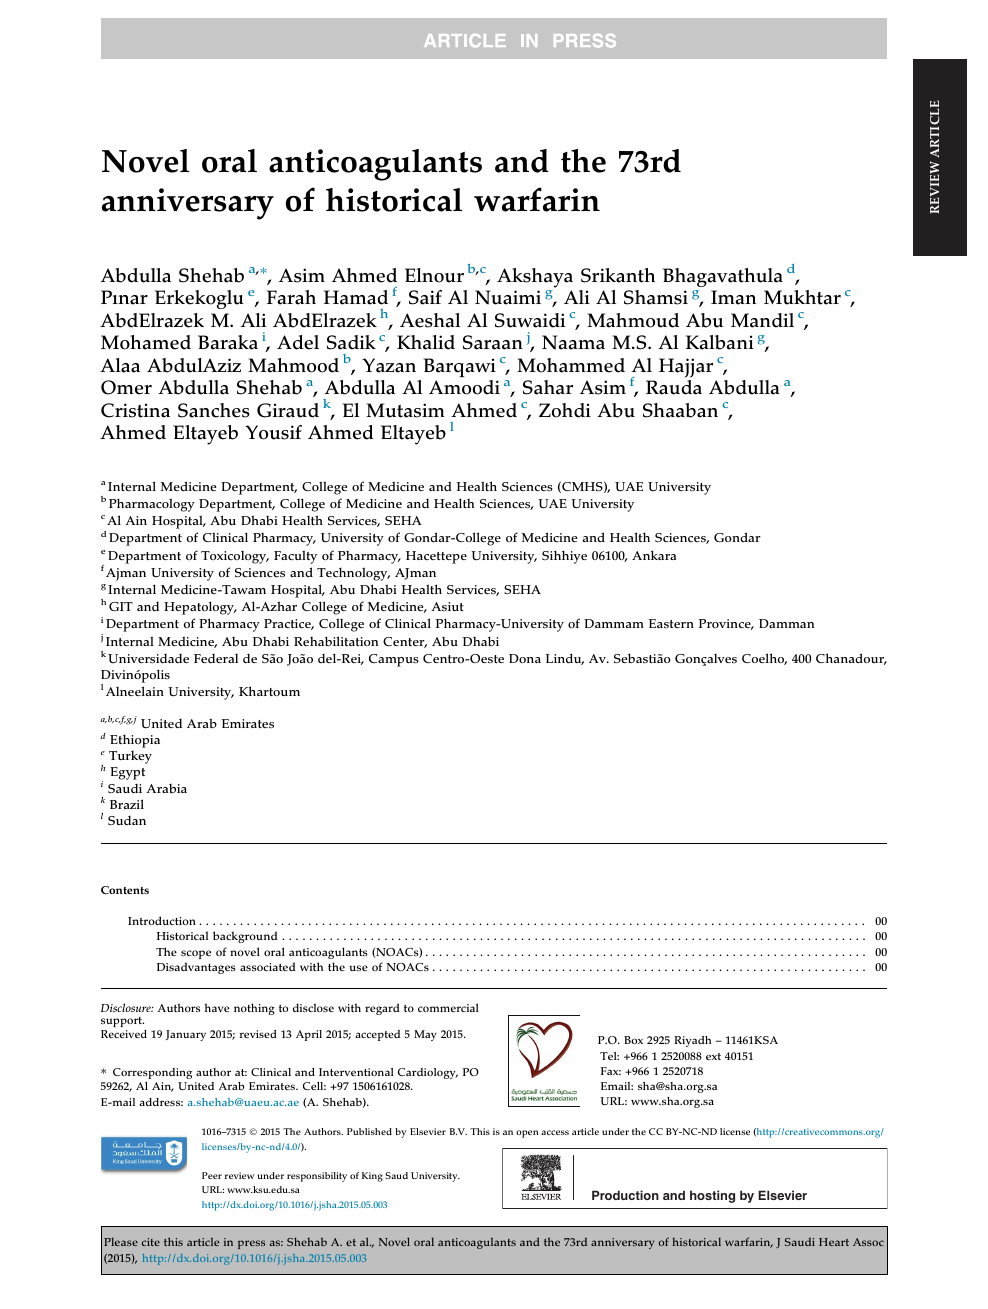 Novel Oral Anticoagulants And The 73rd Anniversary Of Historical Warfarin Topic Of Research Paper In Clinical Medicine Download Scholarly Article Pdf And Read For Free On Cyberleninka Open Science Hub